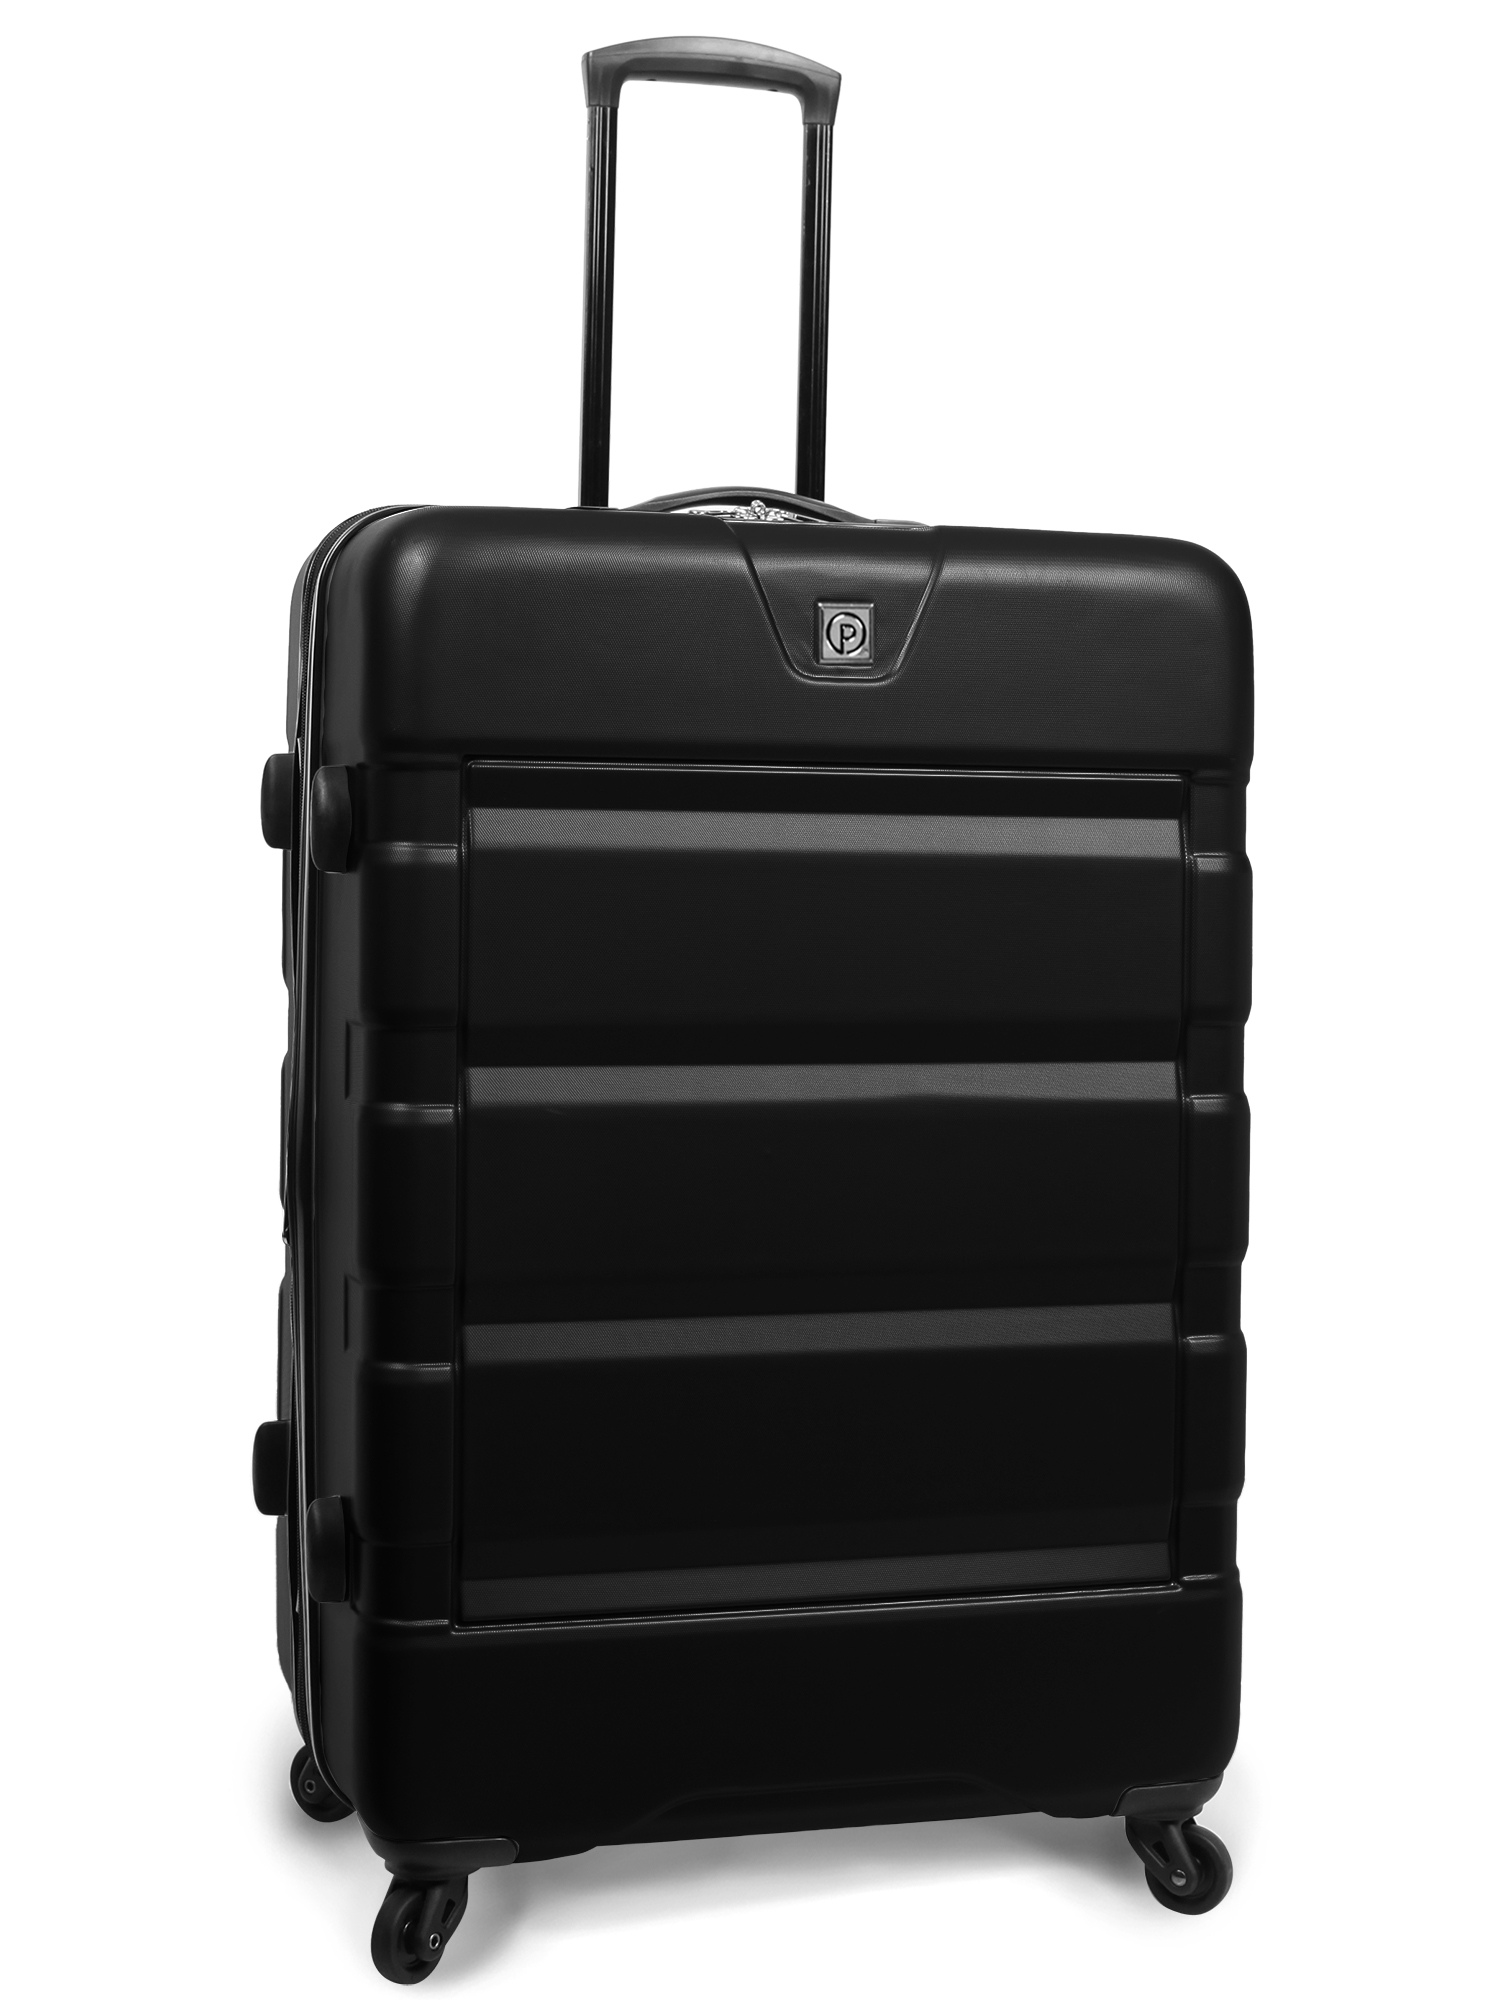 Protege 28" Colossus ABS Hard Side Luggage, Check Size (Online Exclusive) - image 2 of 10